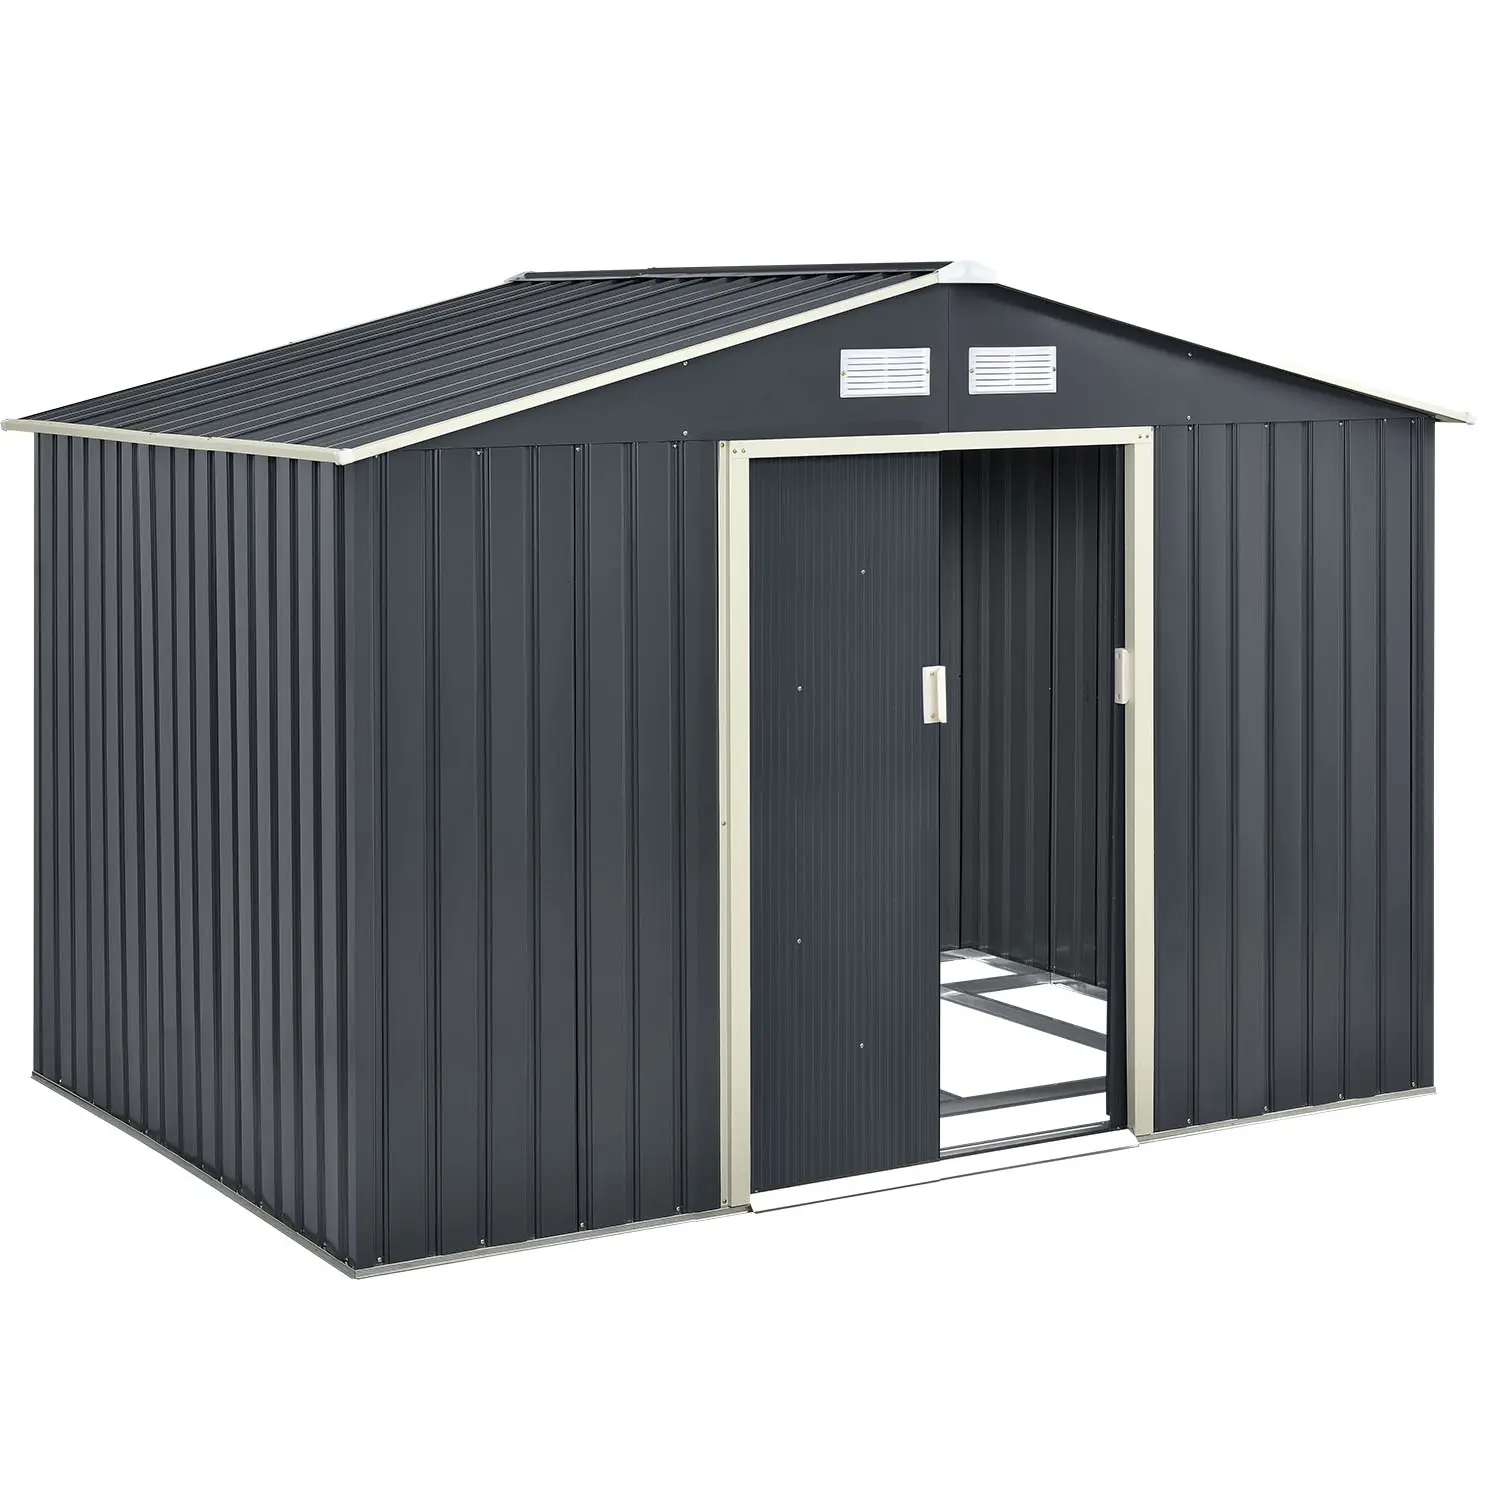 hot sale customize storage tool shed garden use black color high quality bike shed